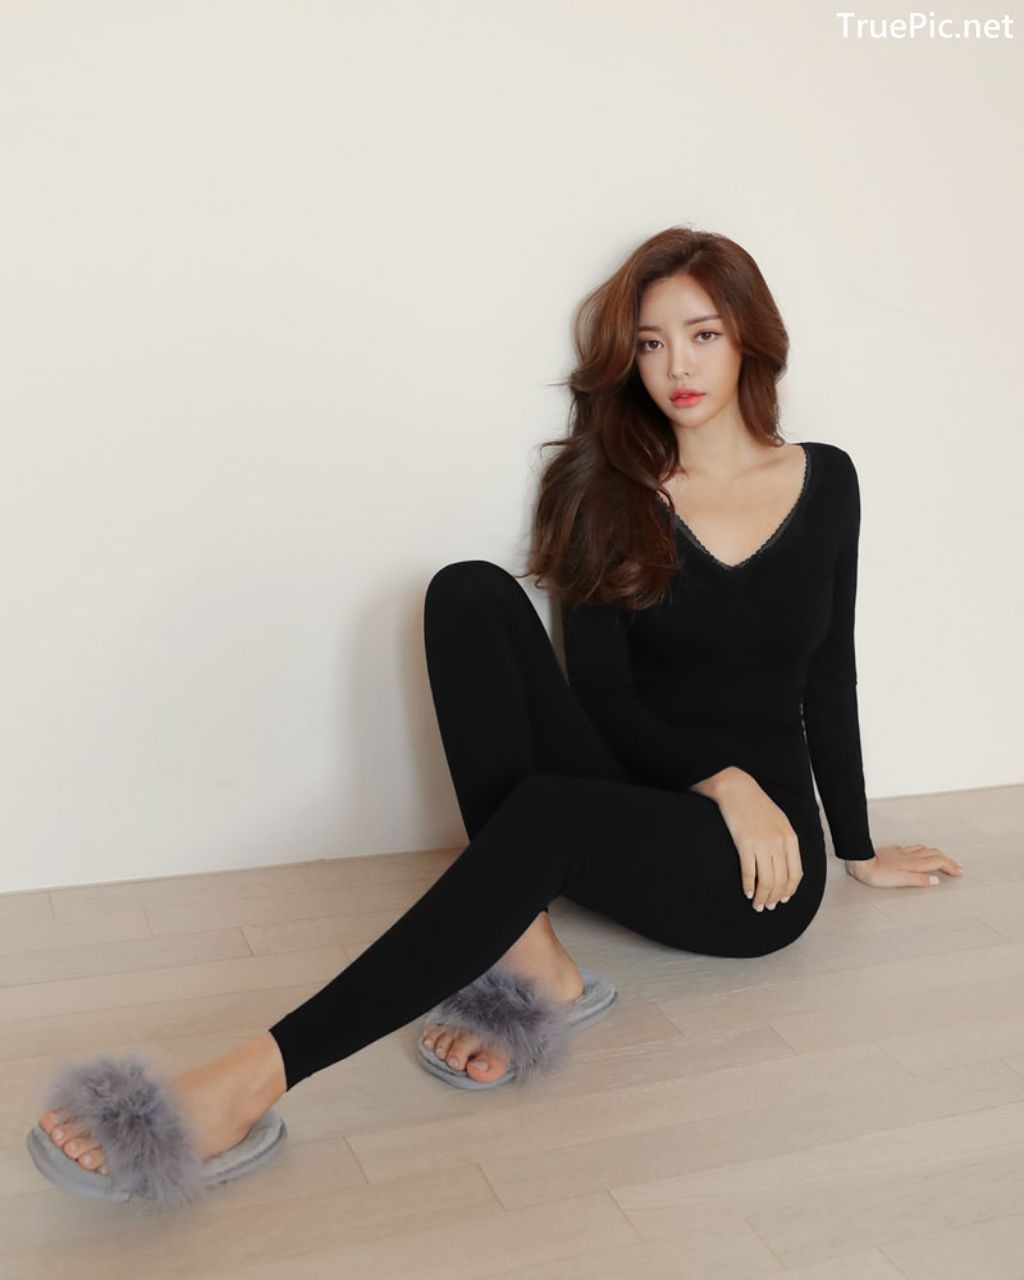 Image-Korean-Fashion-Model-Jin-Hee-Black-Tights-And-Winter-Sweater-Dress-TruePic.net- Picture-12